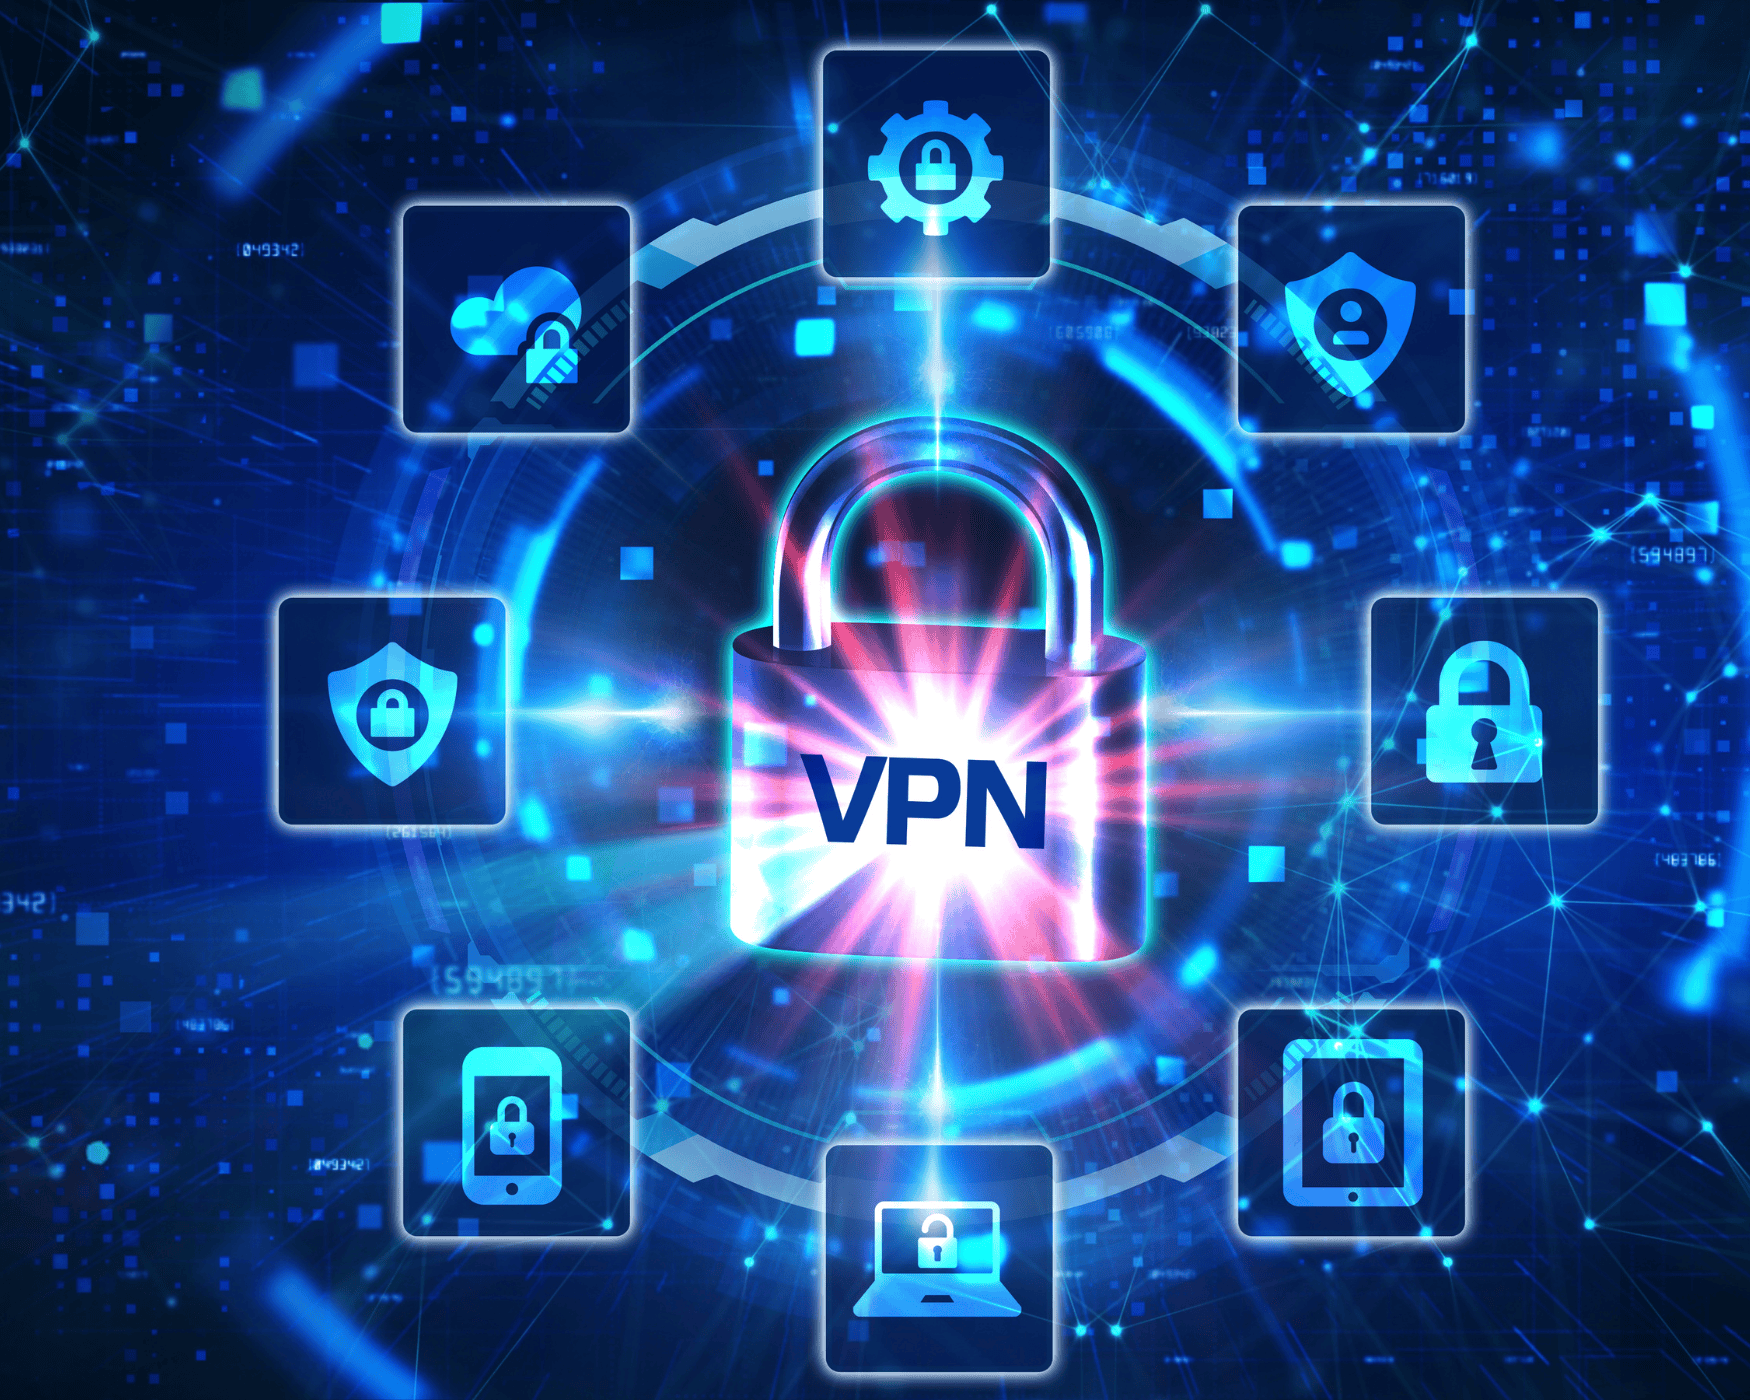 Graphic showing a VPN